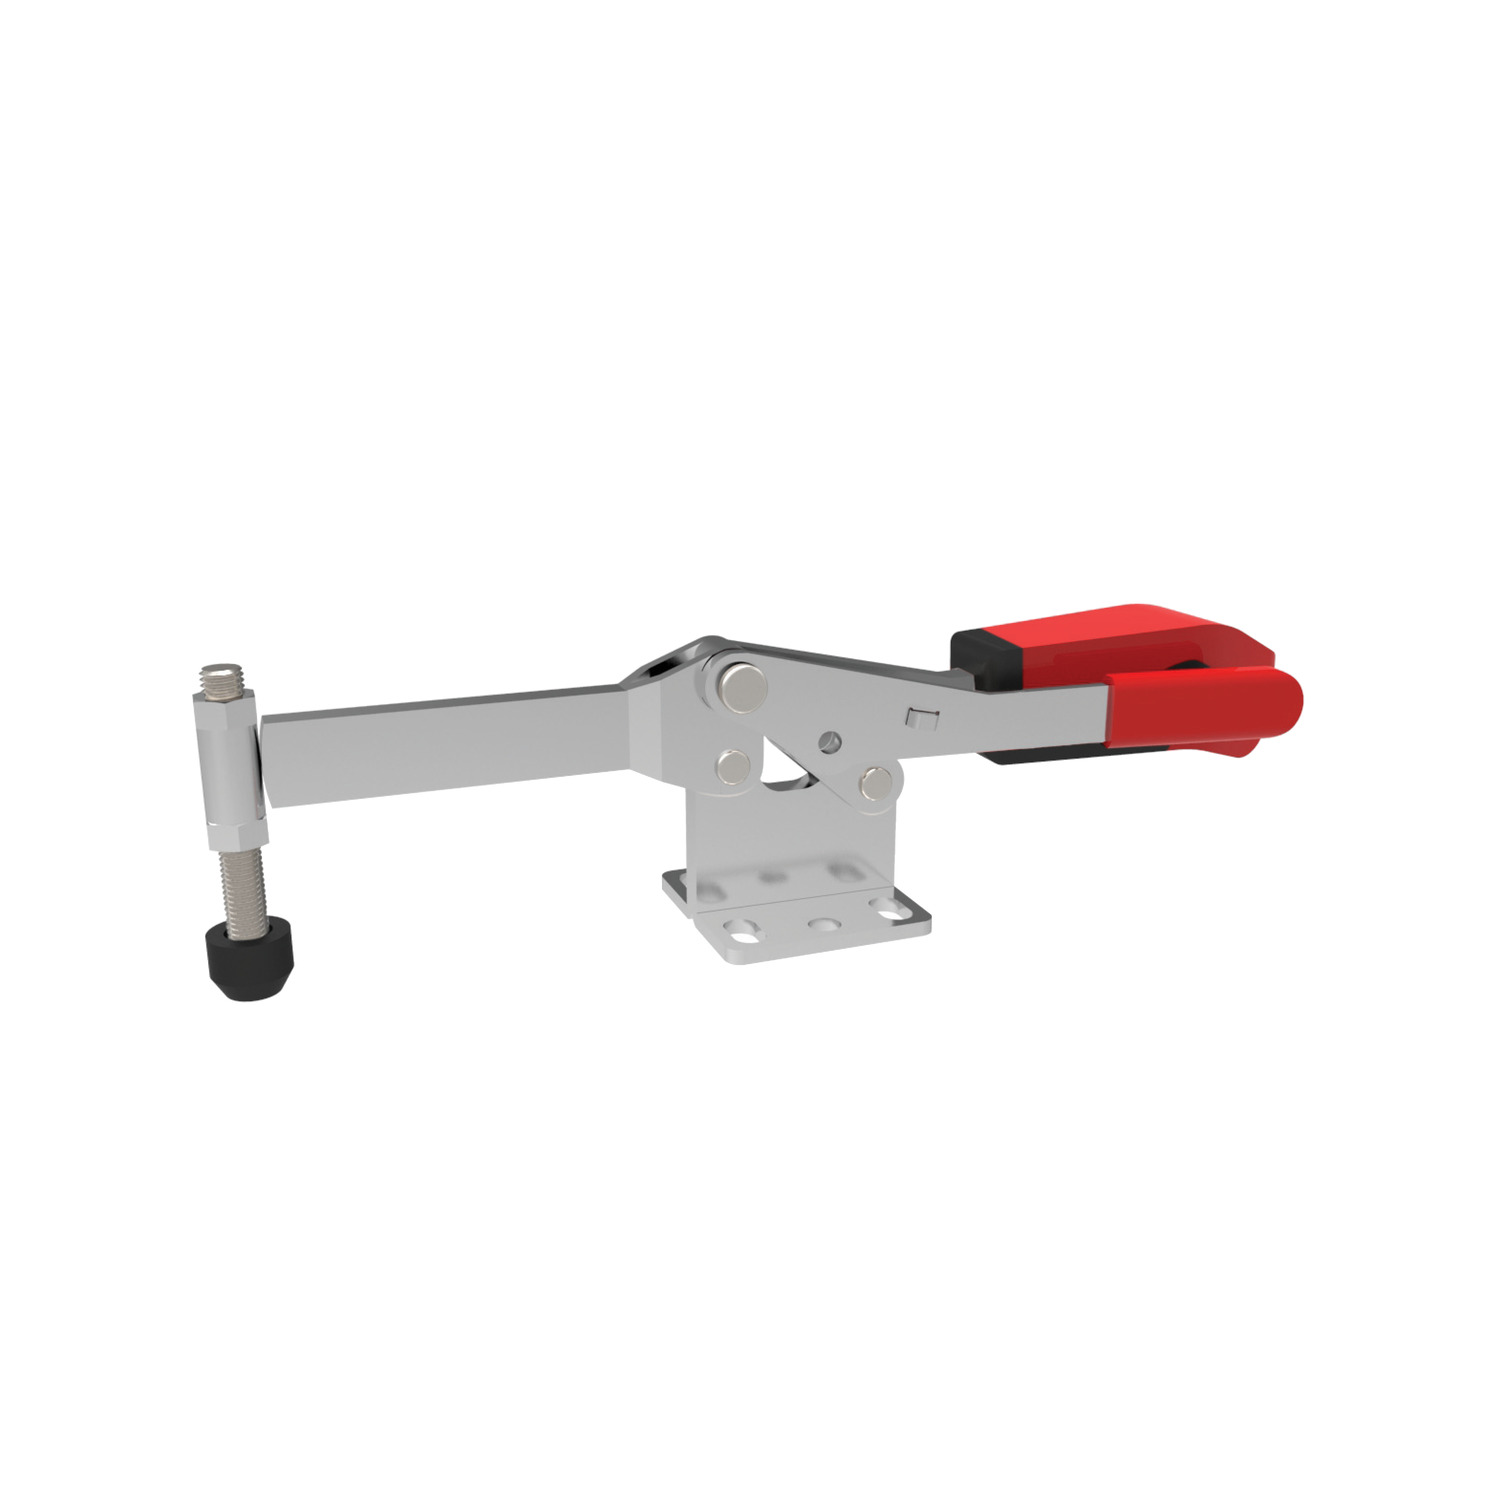 41040 - Horizontal Acting Toggle Clamps